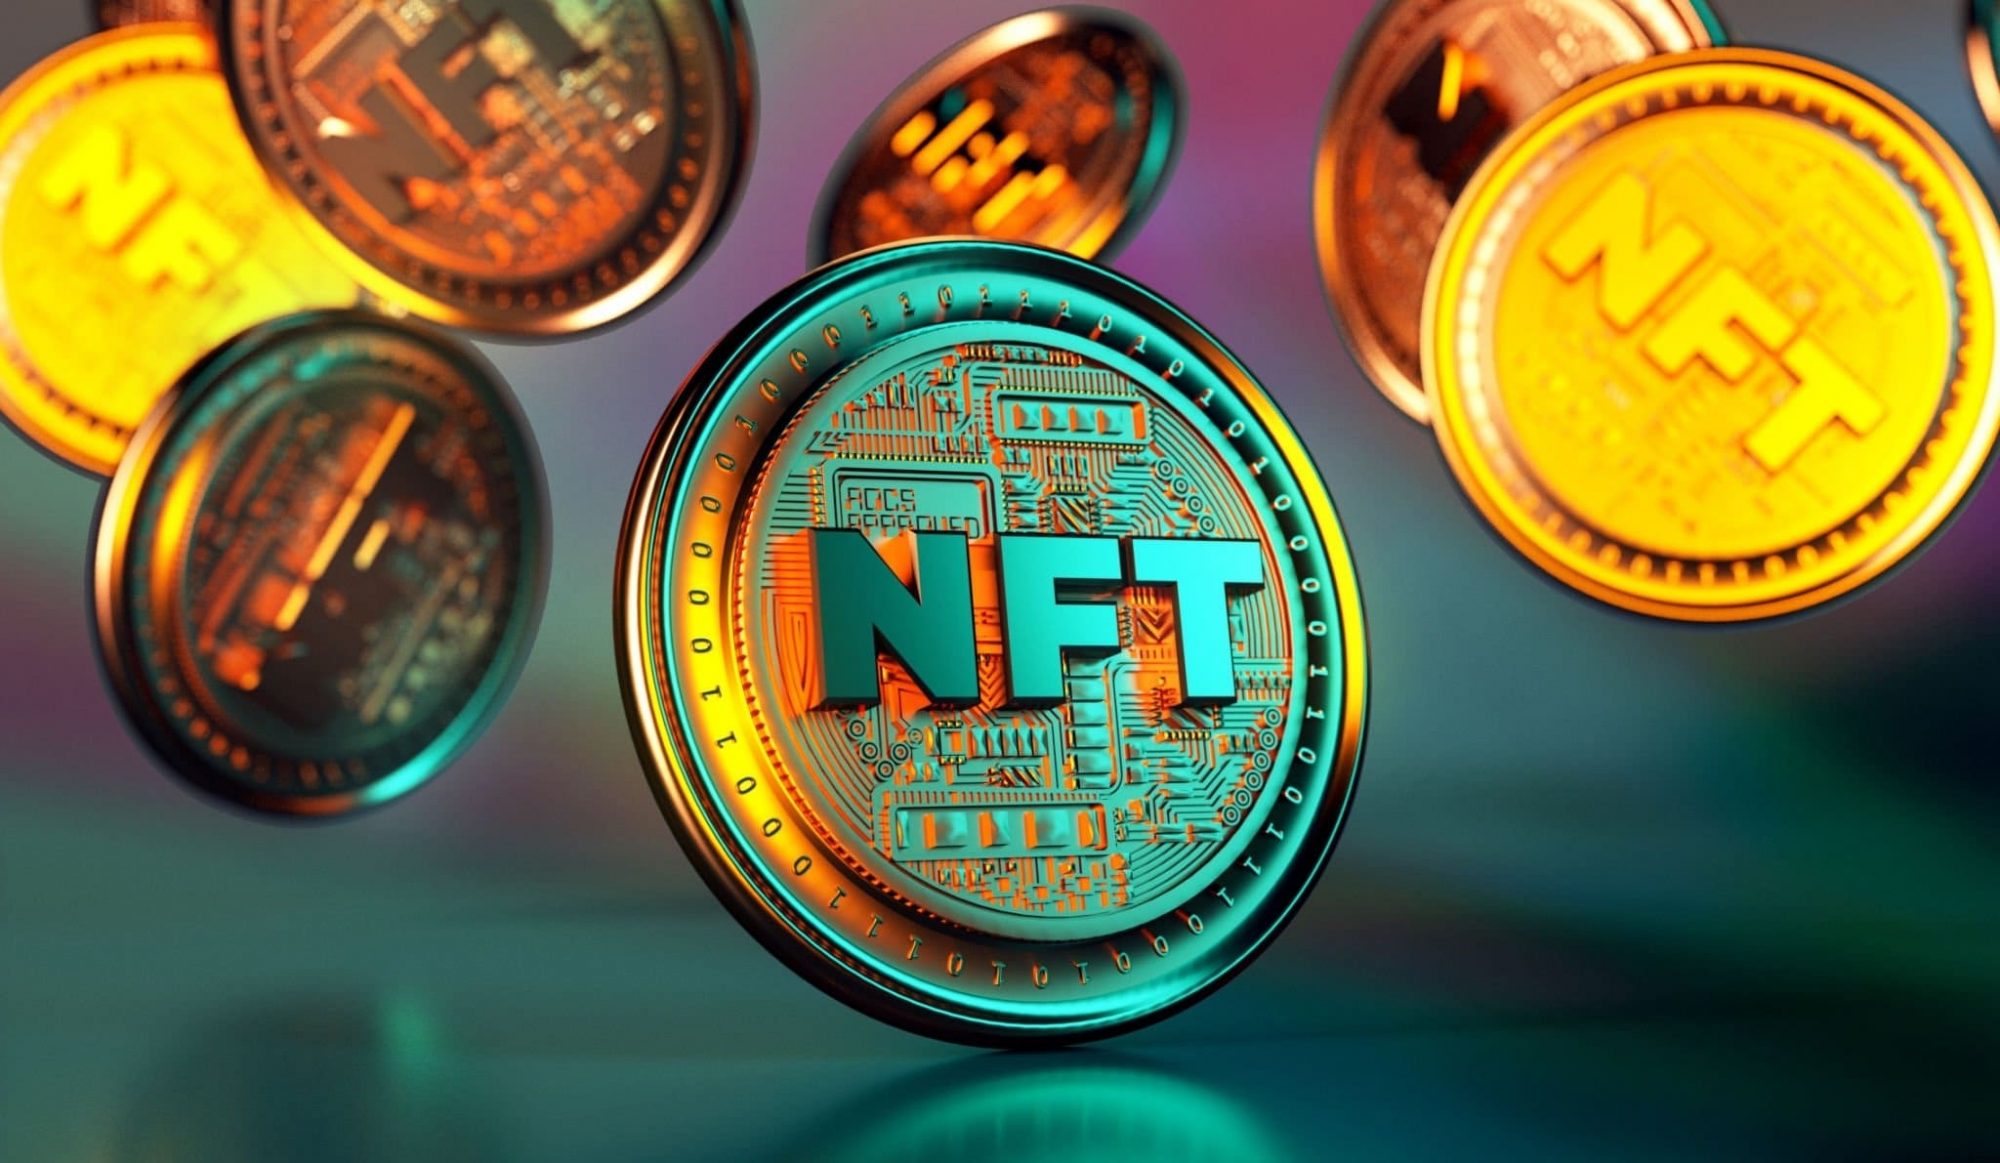 mintable supports nft transactions and xrp ledger